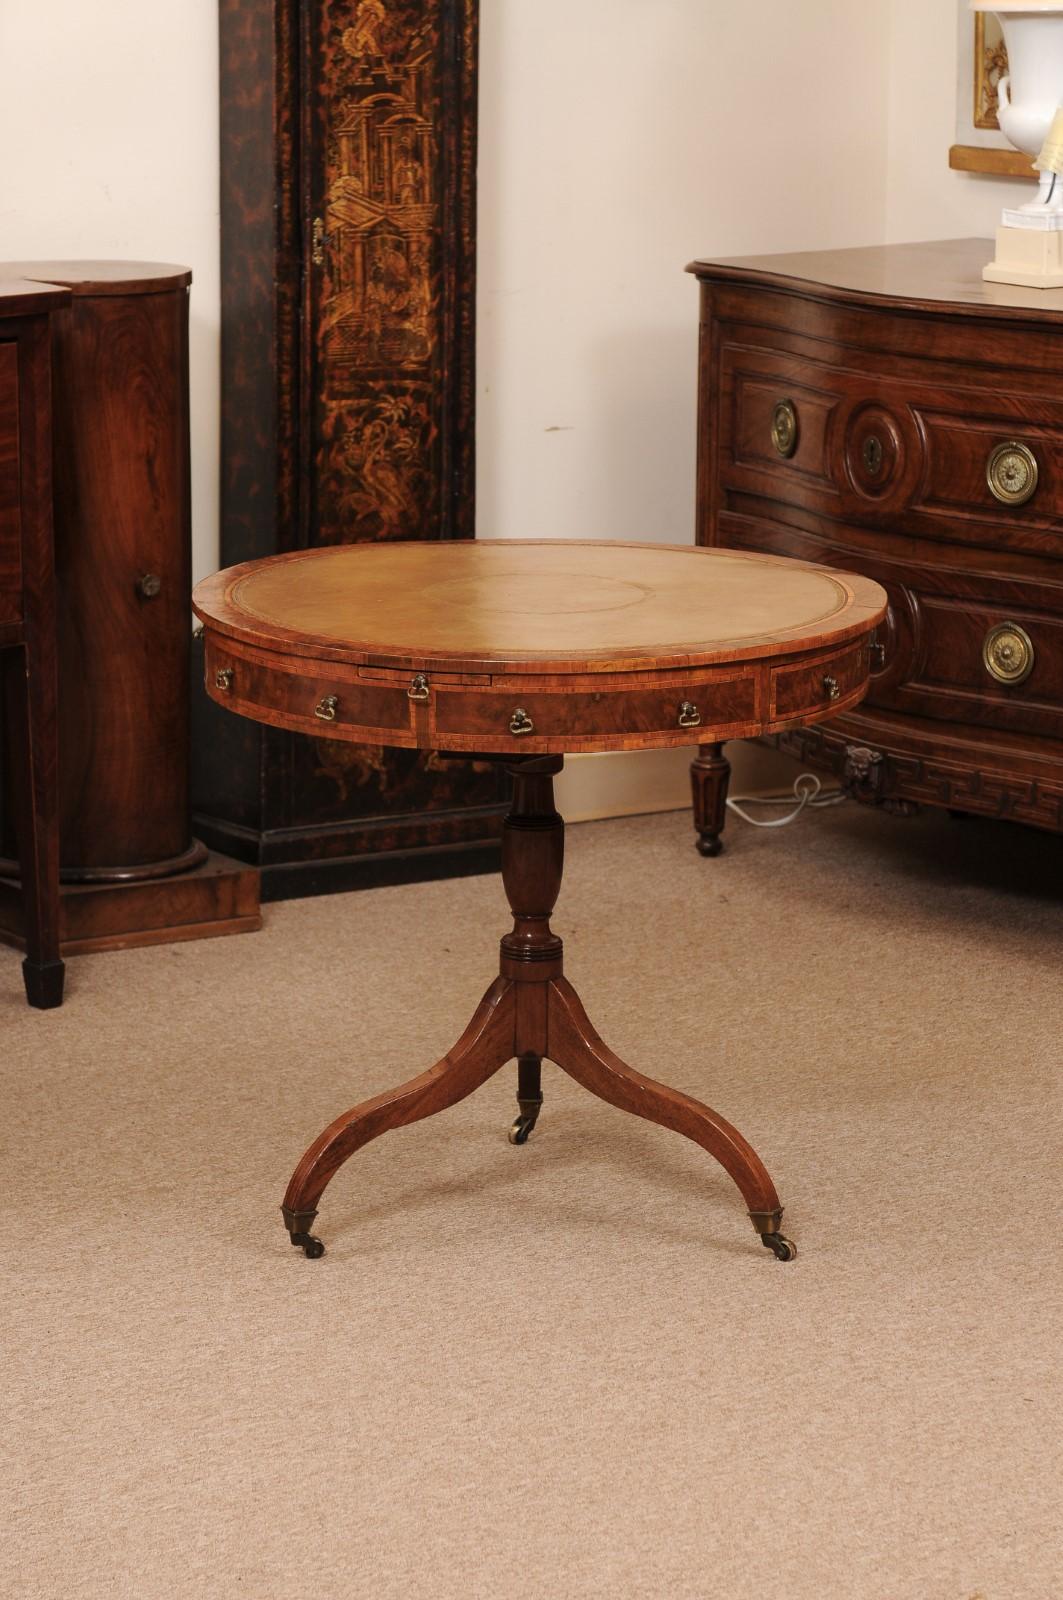 18th Century English Small Mulberry Drum Table with Inlay & Leather Top In Fair Condition For Sale In Atlanta, GA